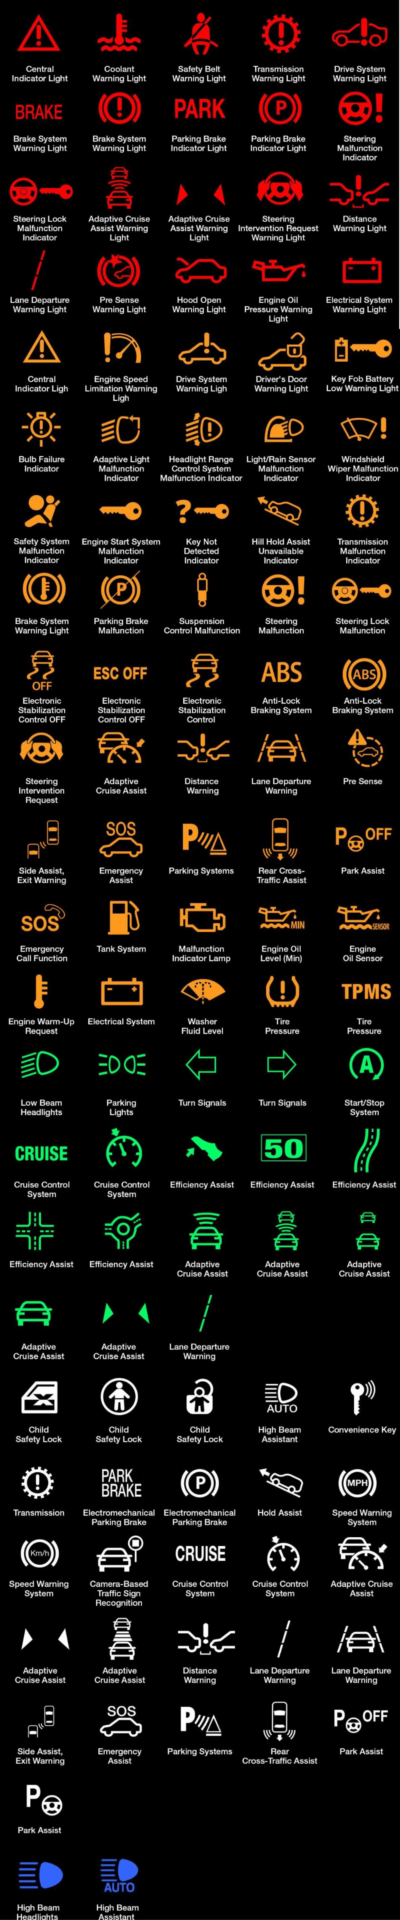 Vauxhall Zafira dashboard symbols and meanings